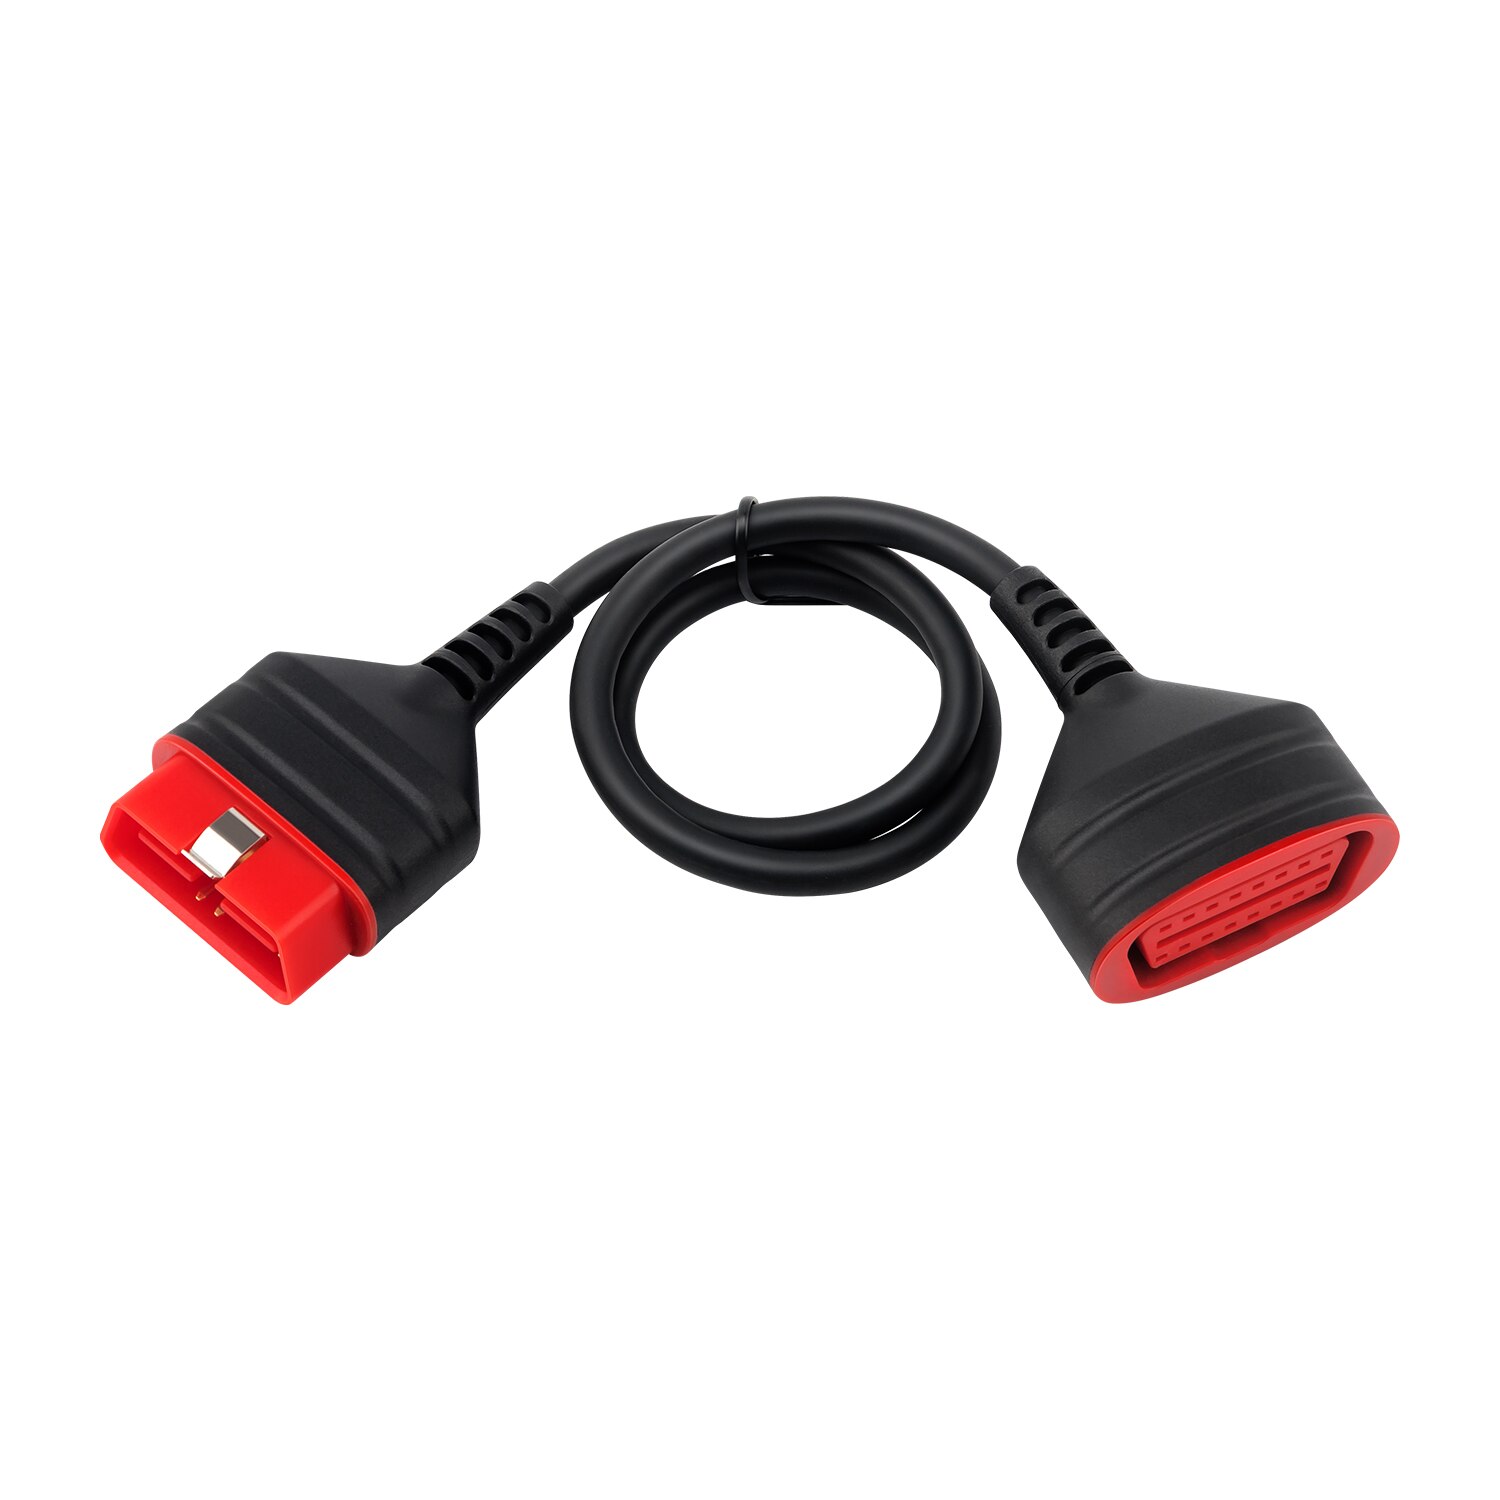 Thinkcar OBDII Extension Cable 16Pin Male To Female OBD2 Connector Diagnostic Tool Extended Adapter